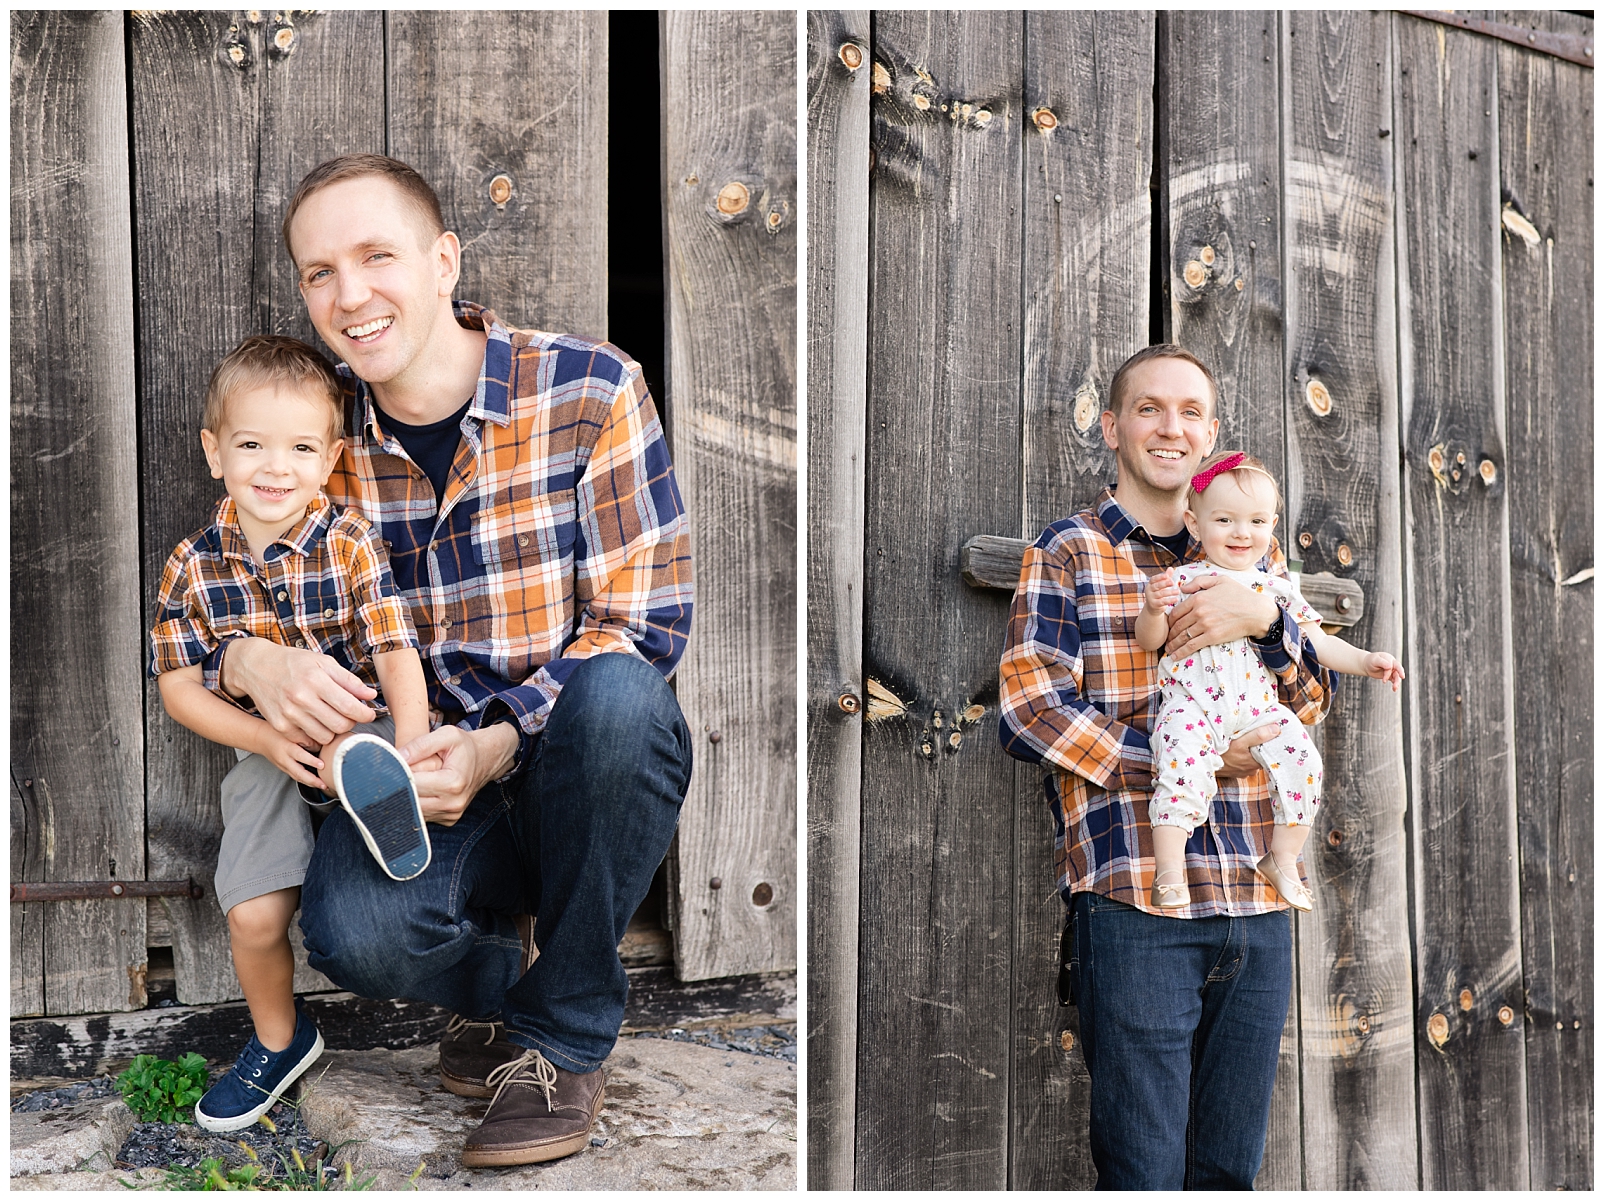 father and son wearing matching plaid shirts and daughter in flower romper